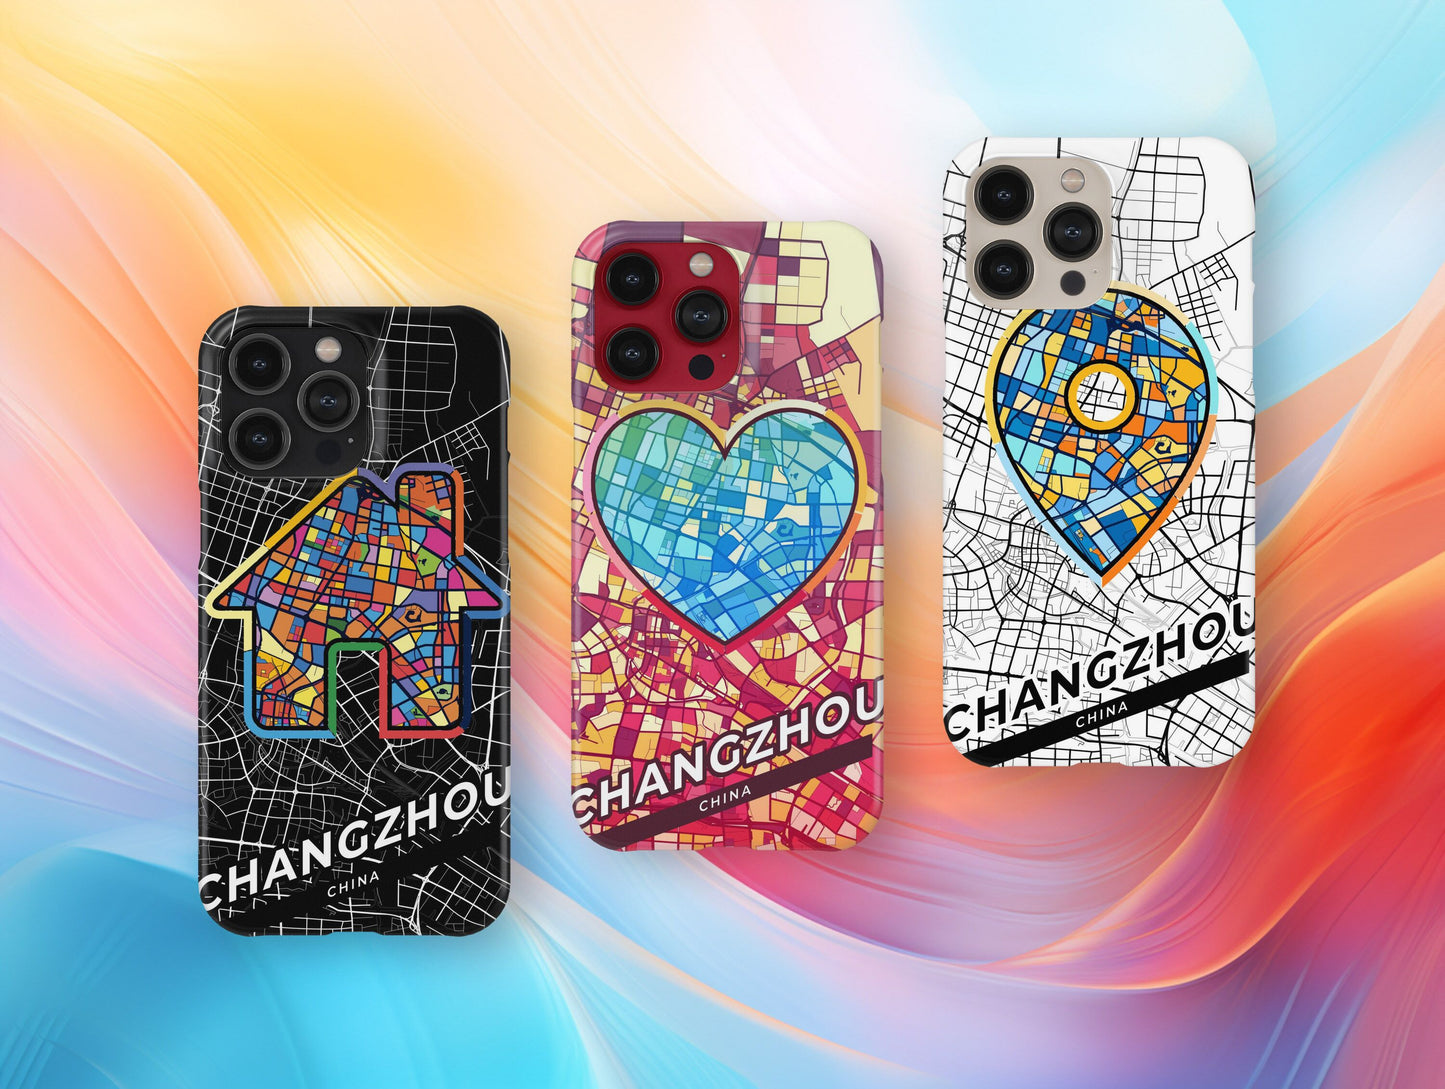 Changzhou China slim phone case with colorful icon. Birthday, wedding or housewarming gift. Couple match cases.